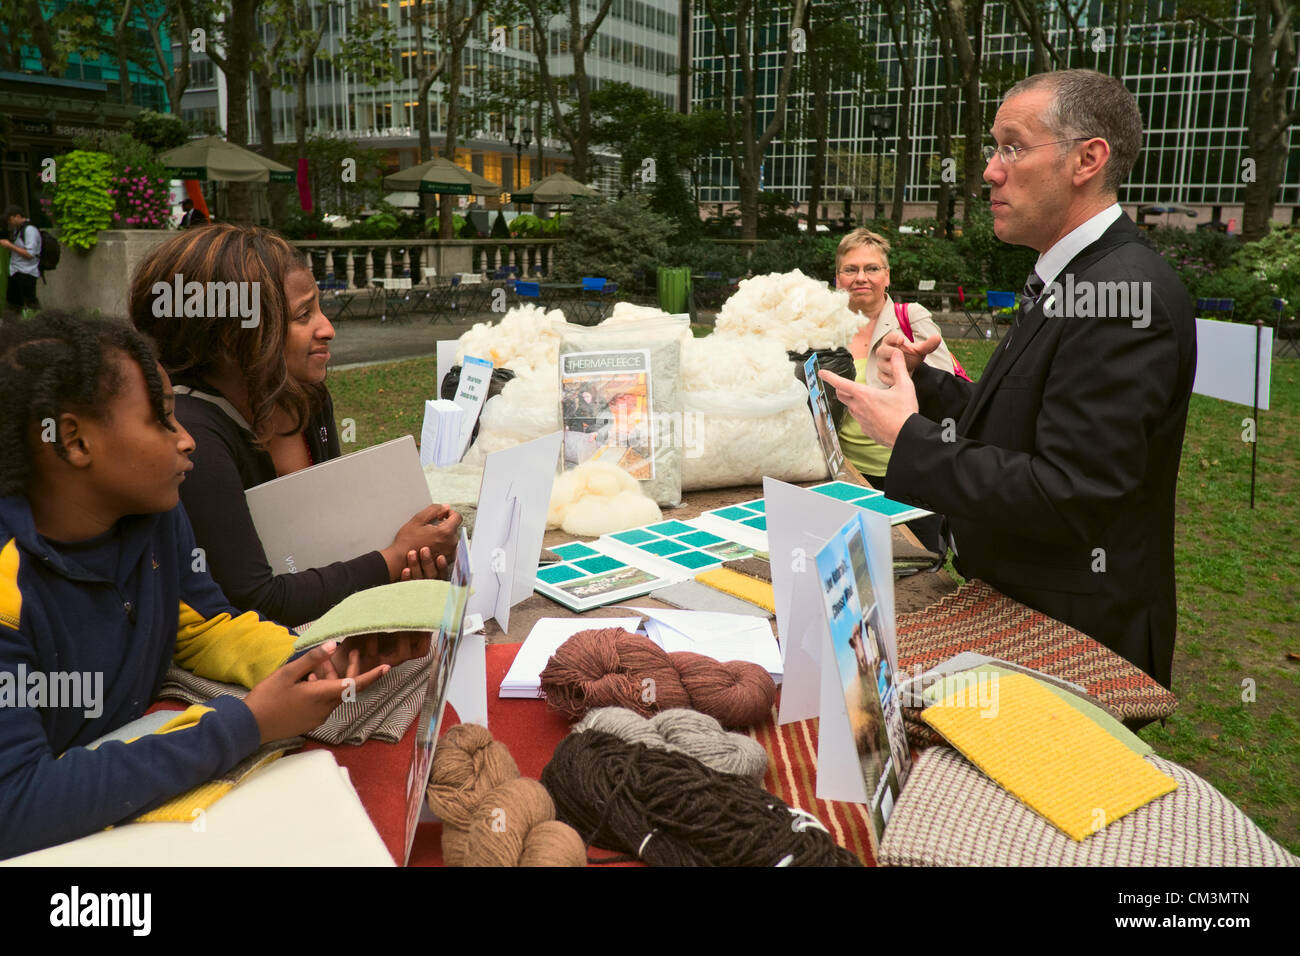 USA. September 27, 2012, New York, NY.  Tim Booth, product development manager, British Wool Marketing Board, makes the pitch for wool in New York's Bryant Park as part of the Campaign for Wool's new US marketing effort.  Britain's Prince Charles is a sponsor of the Campaign for Wool. Stock Photo